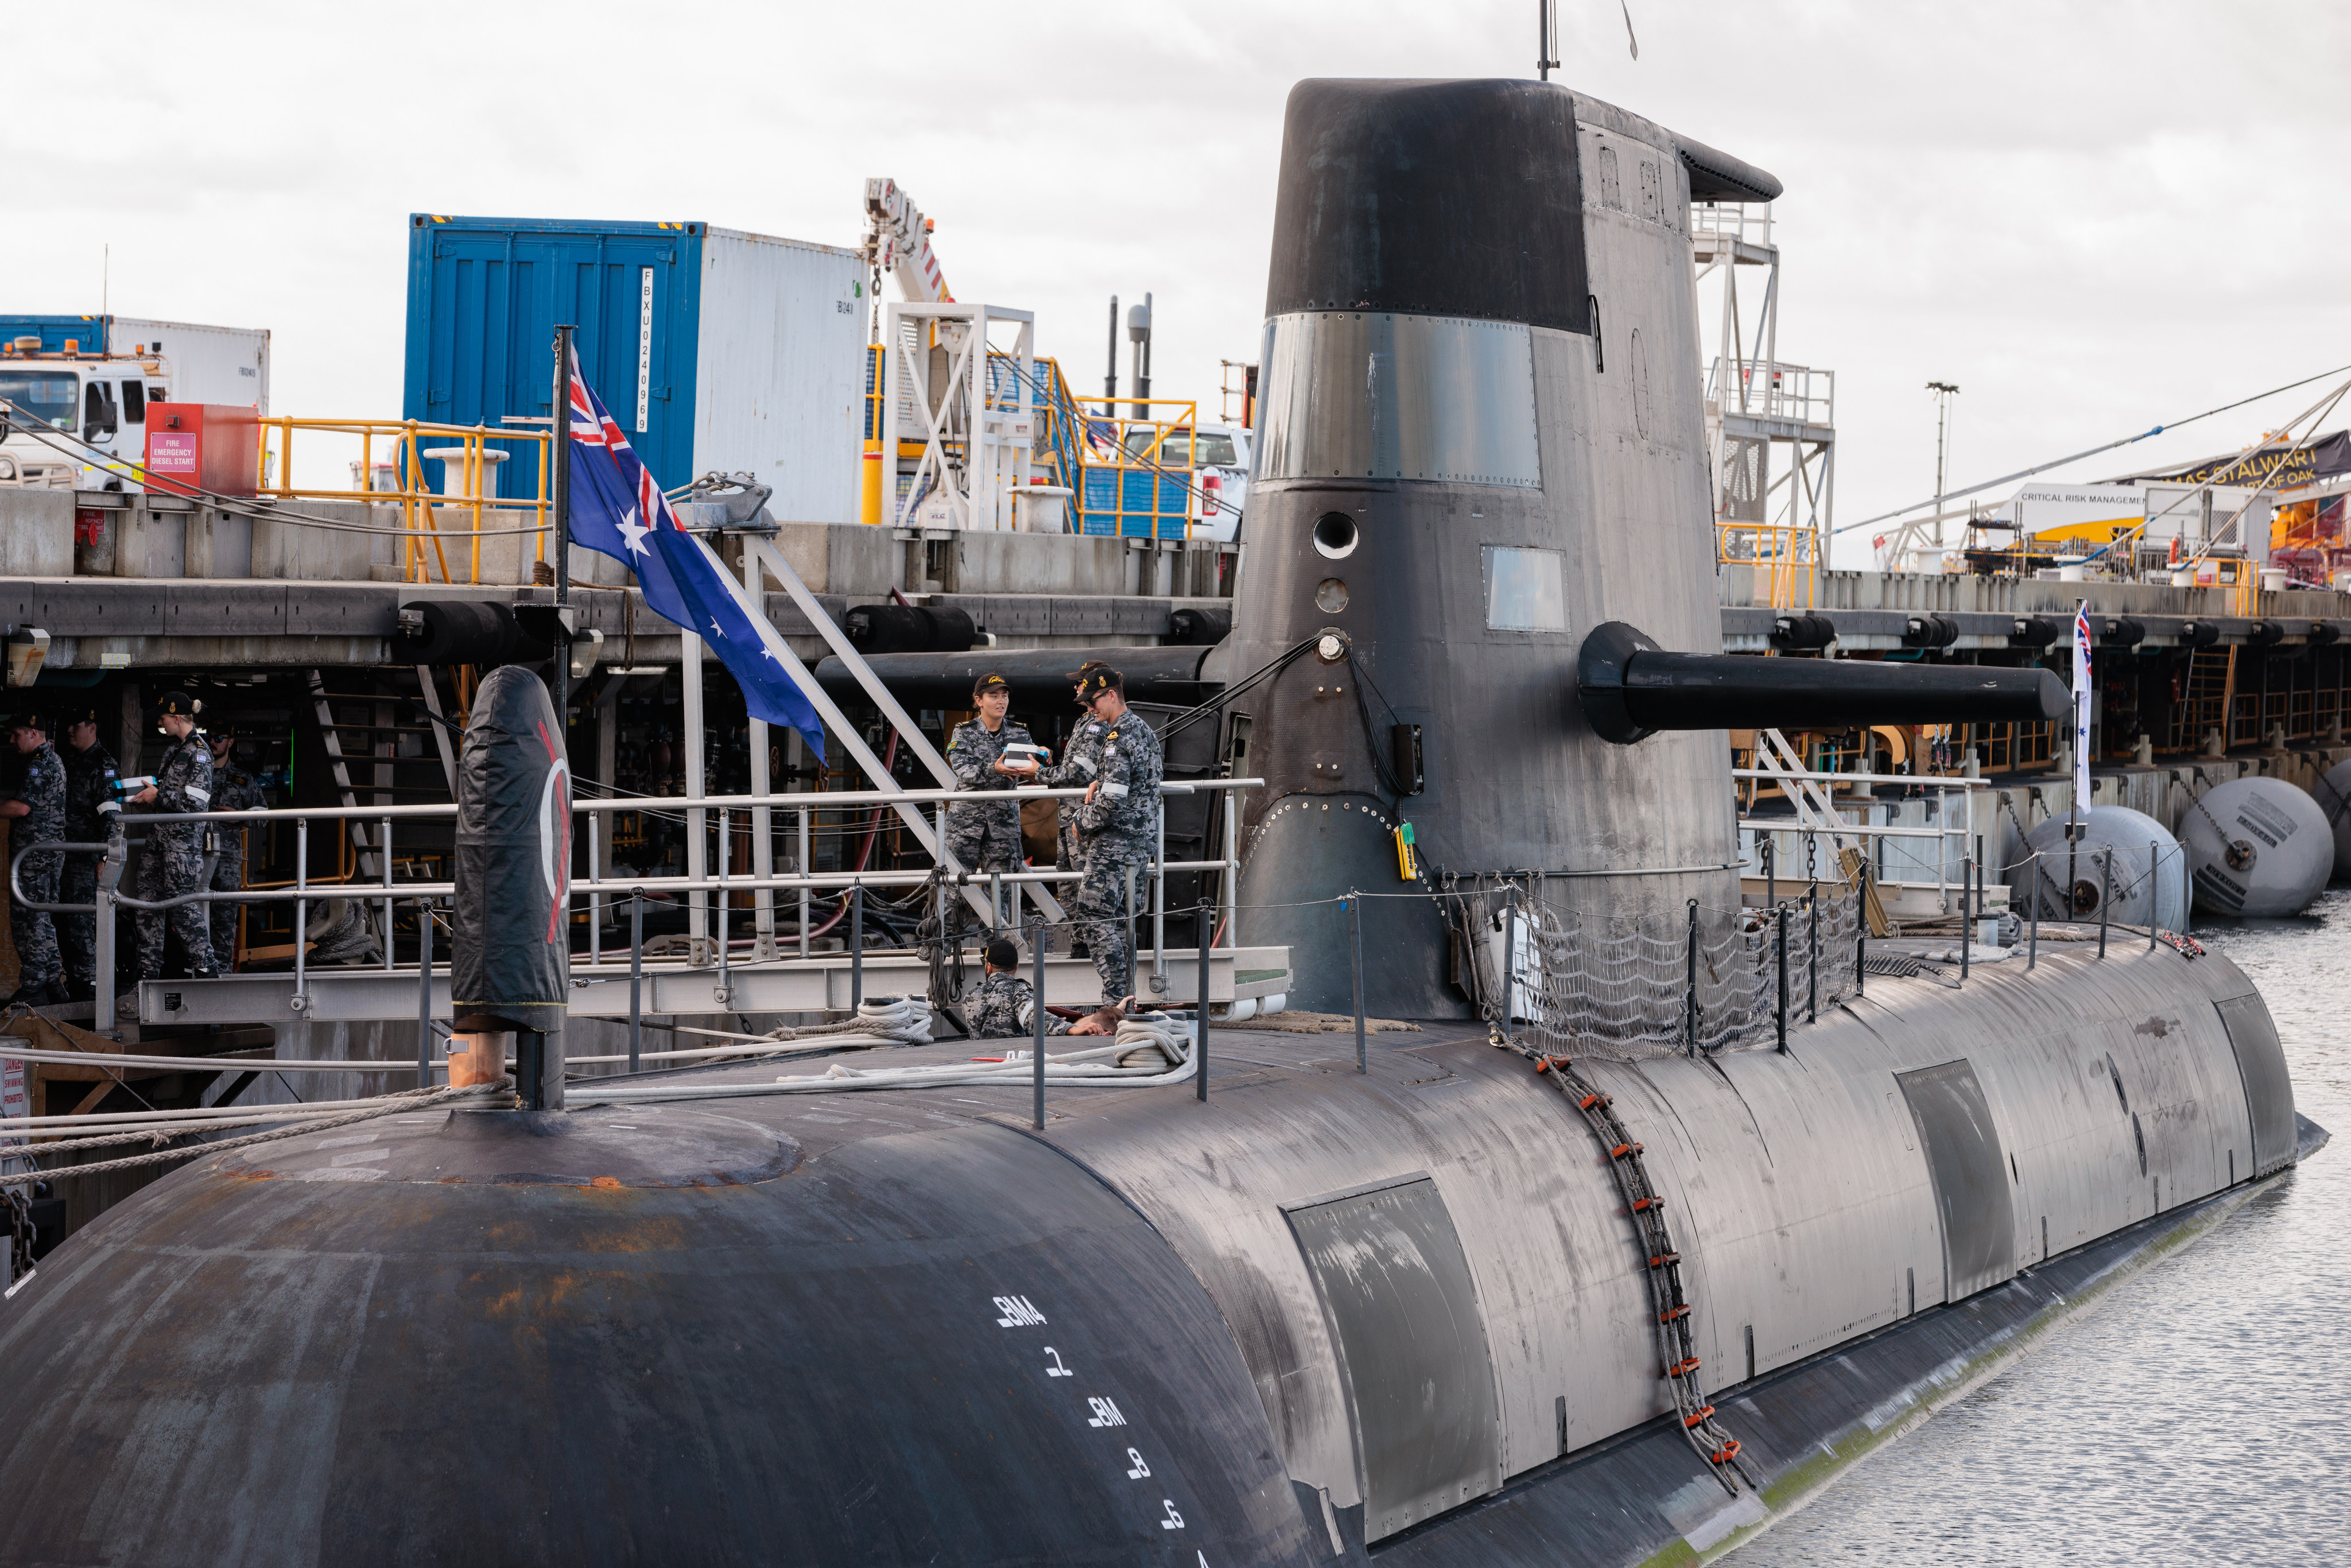 Crew members are seen working onboard HMAS Rankin, a Collins Class submarine at HMAS Stirling in Perth, during a visit by Australian Defence Minister. Photo: /dpa